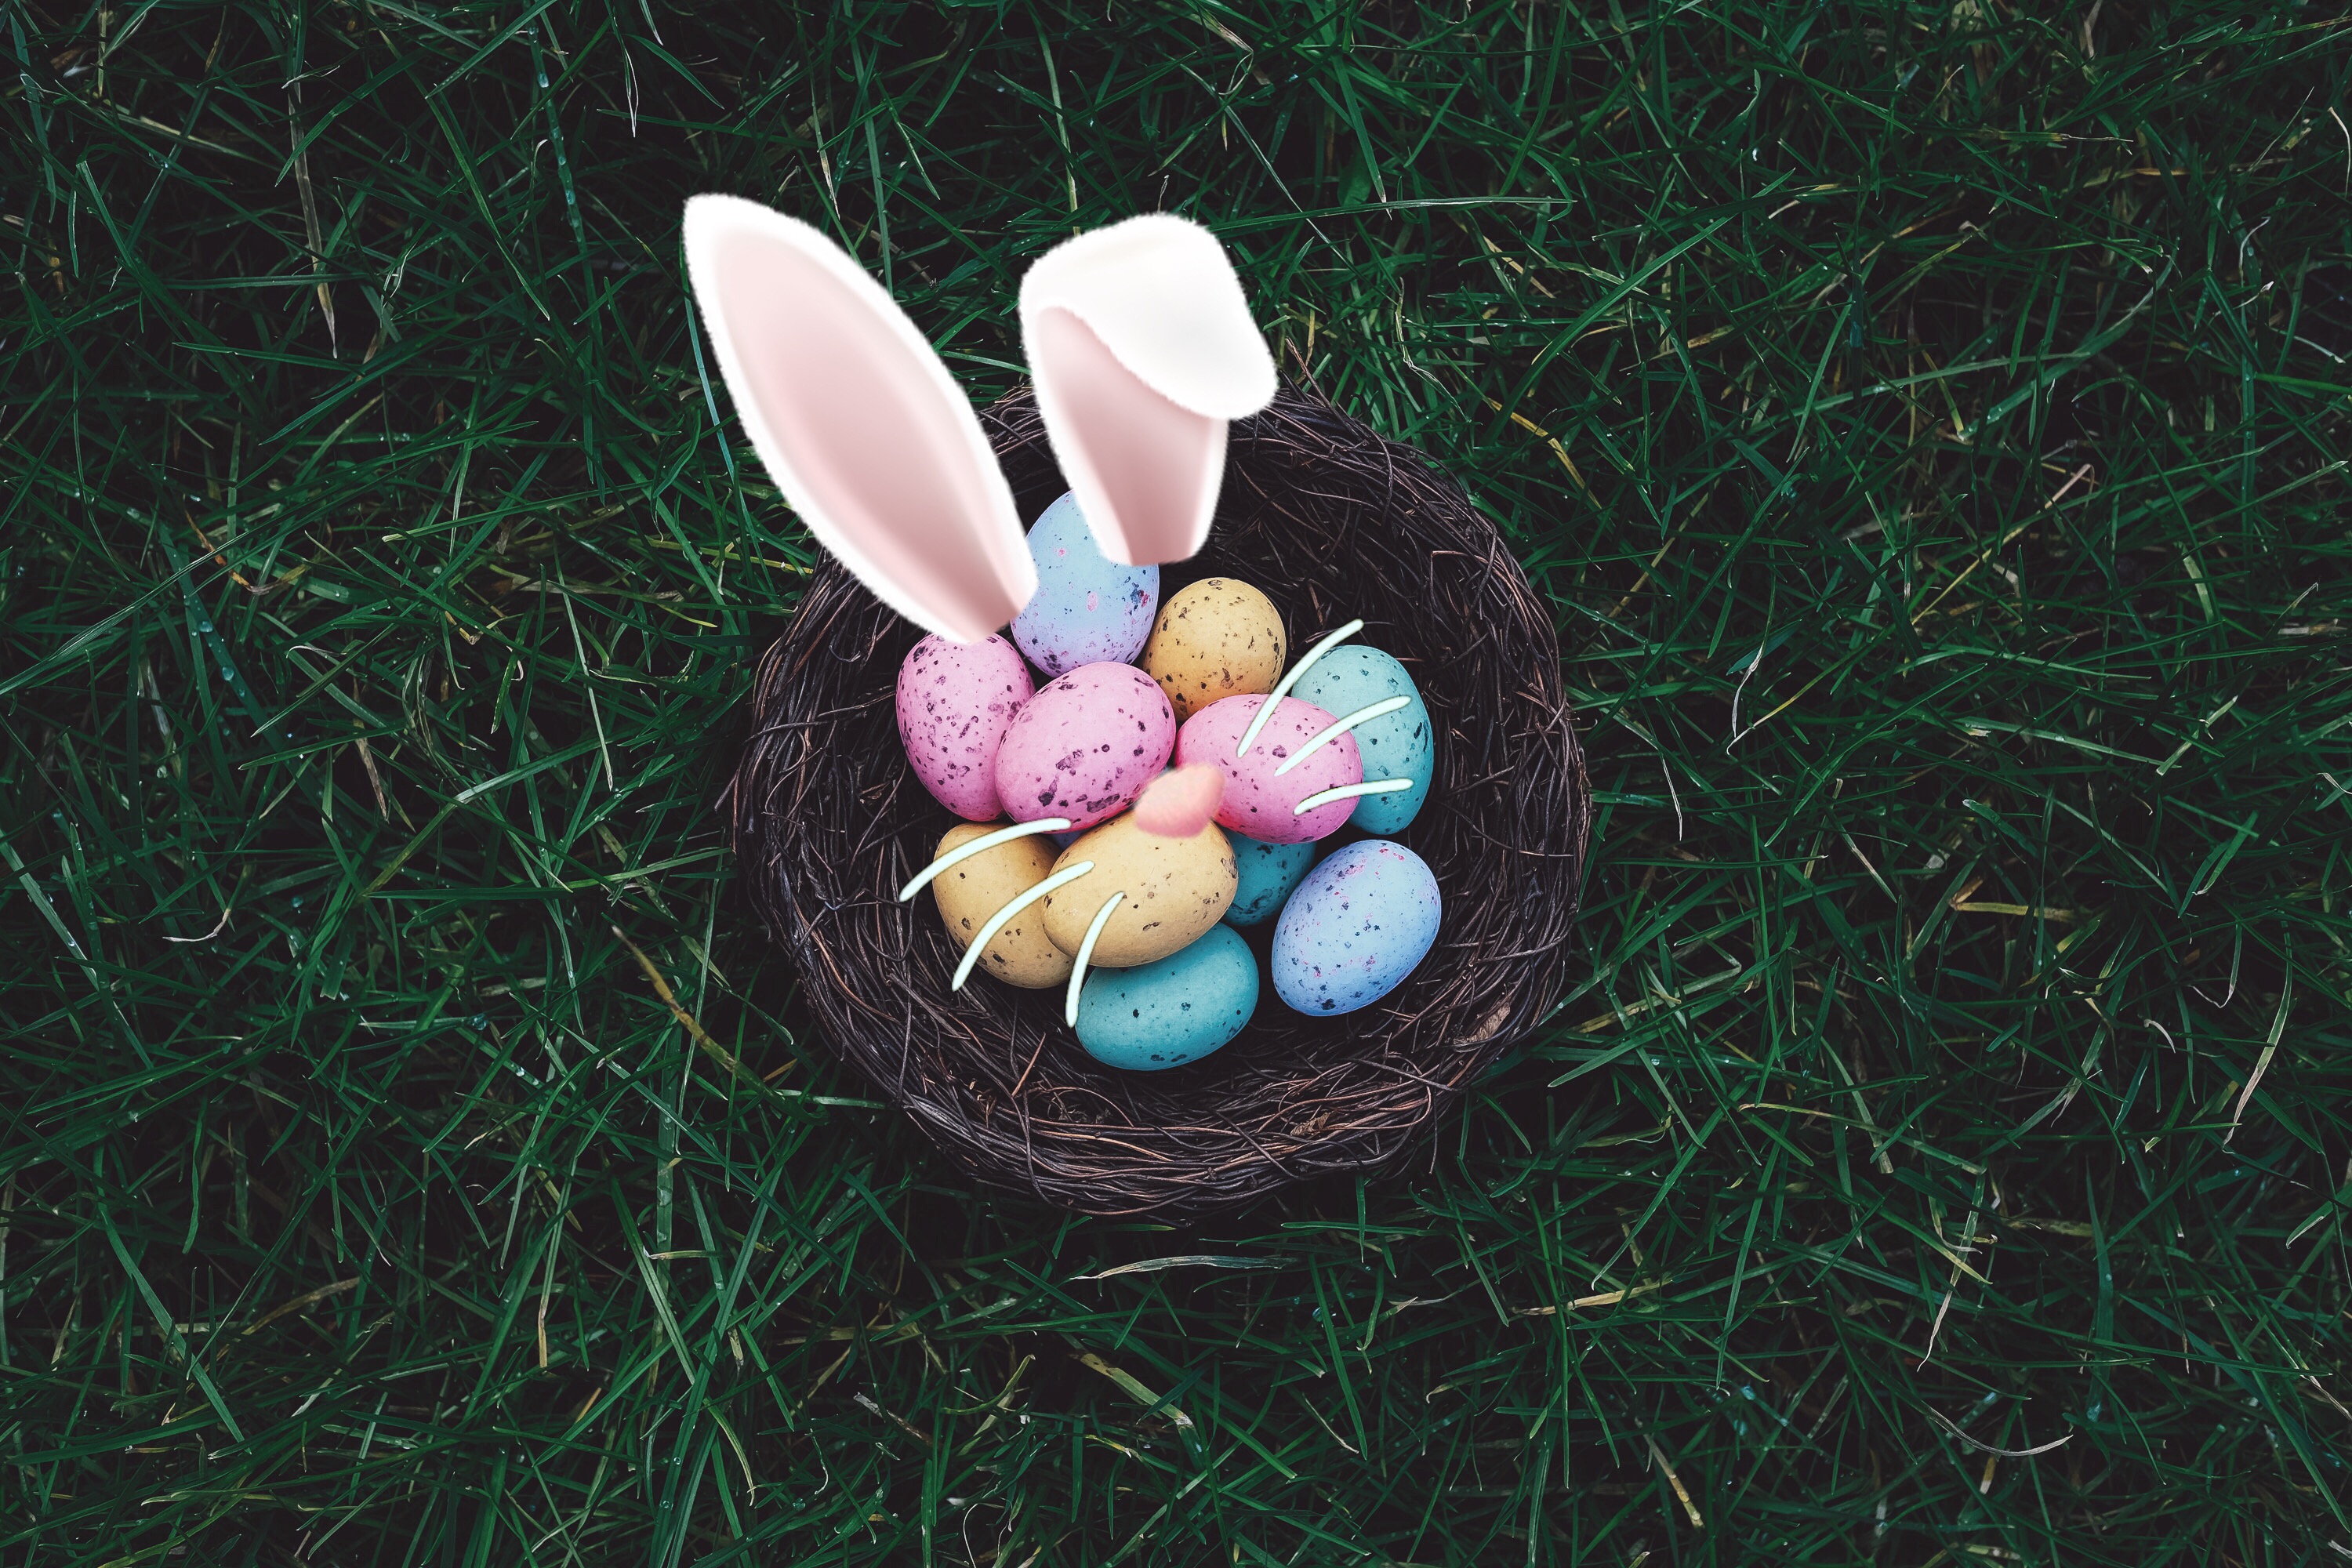 Discover the coolest HAPPY EASTER!!! #bunny #eegs #basket #easter images.